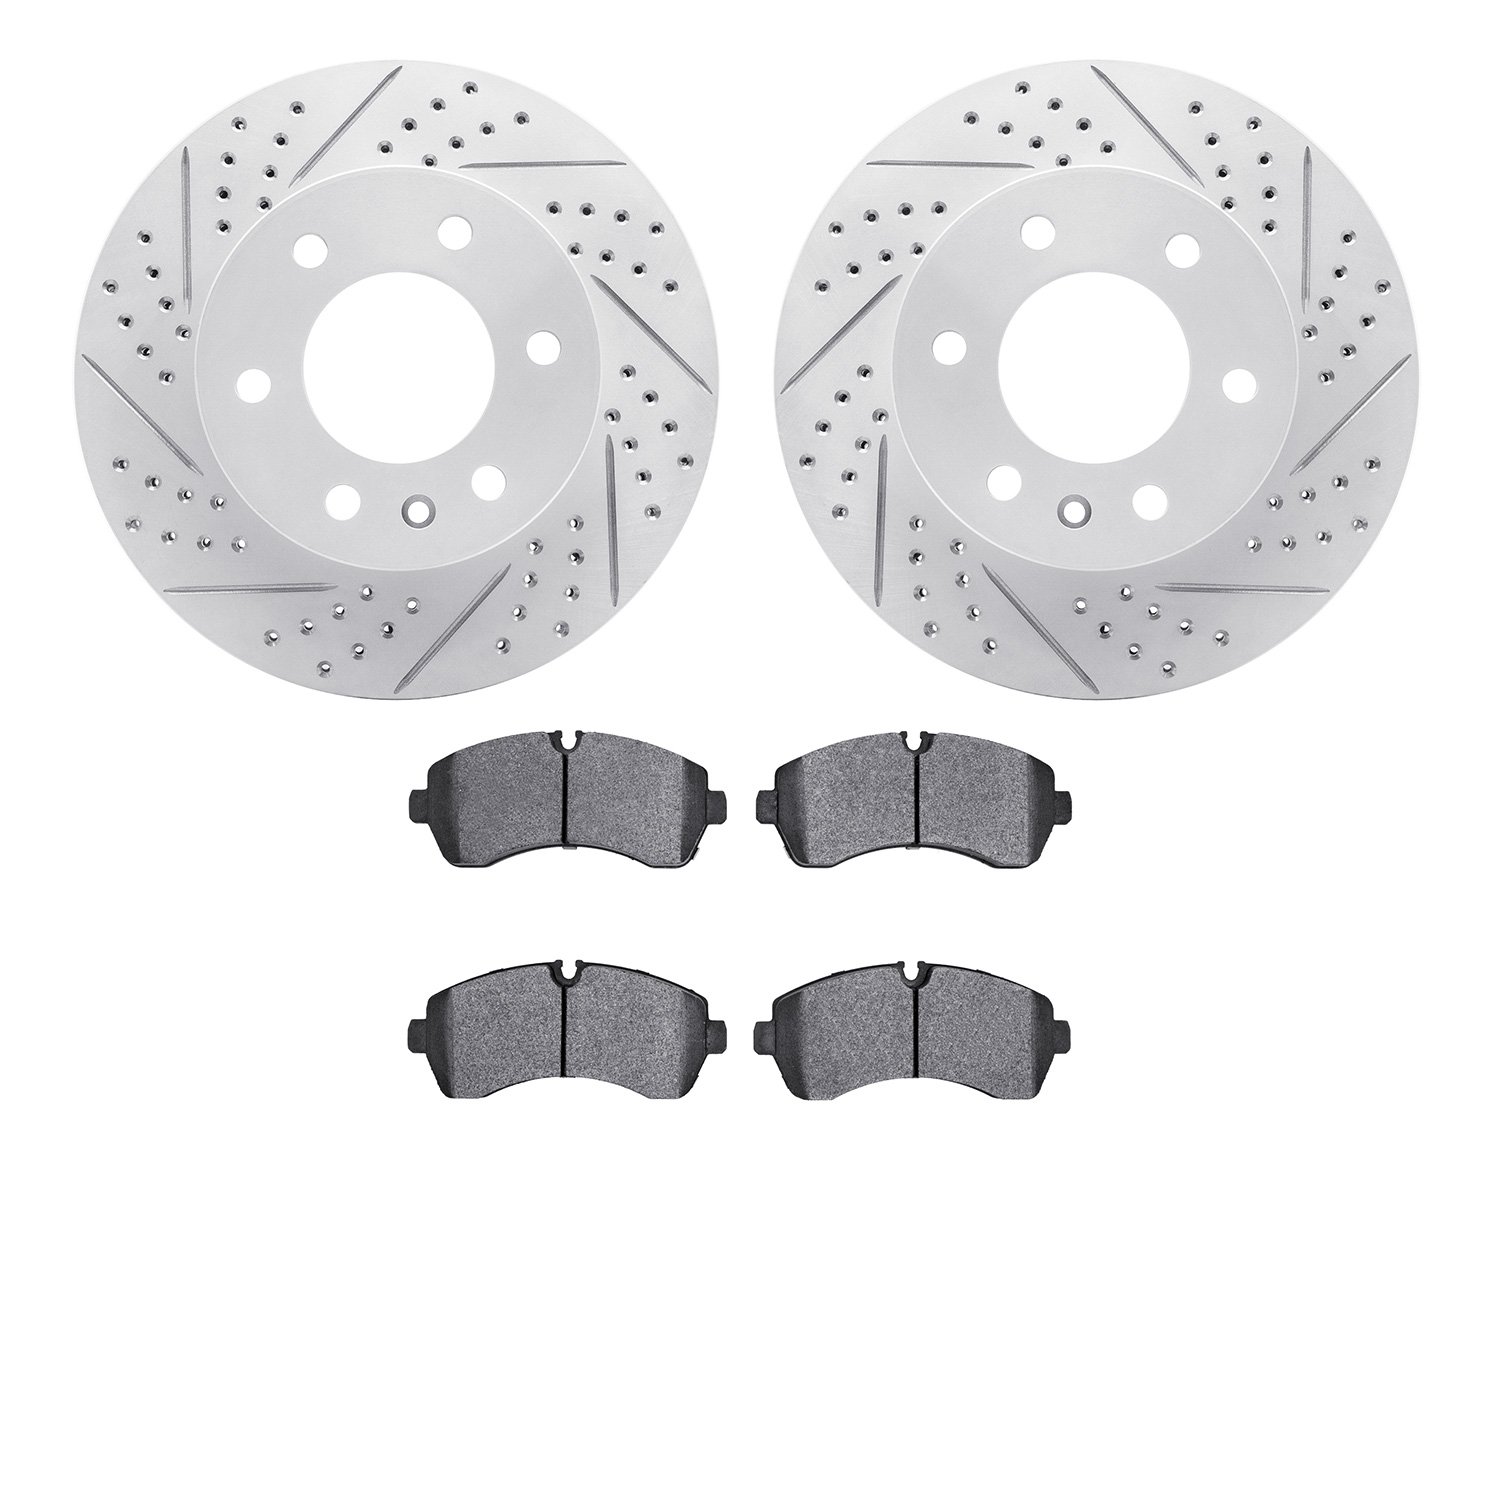 2202-40027 Geoperformance Drilled/Slotted Rotors w/Heavy-Duty Pads Kit, Fits Select Multiple Makes/Models, Position: Front